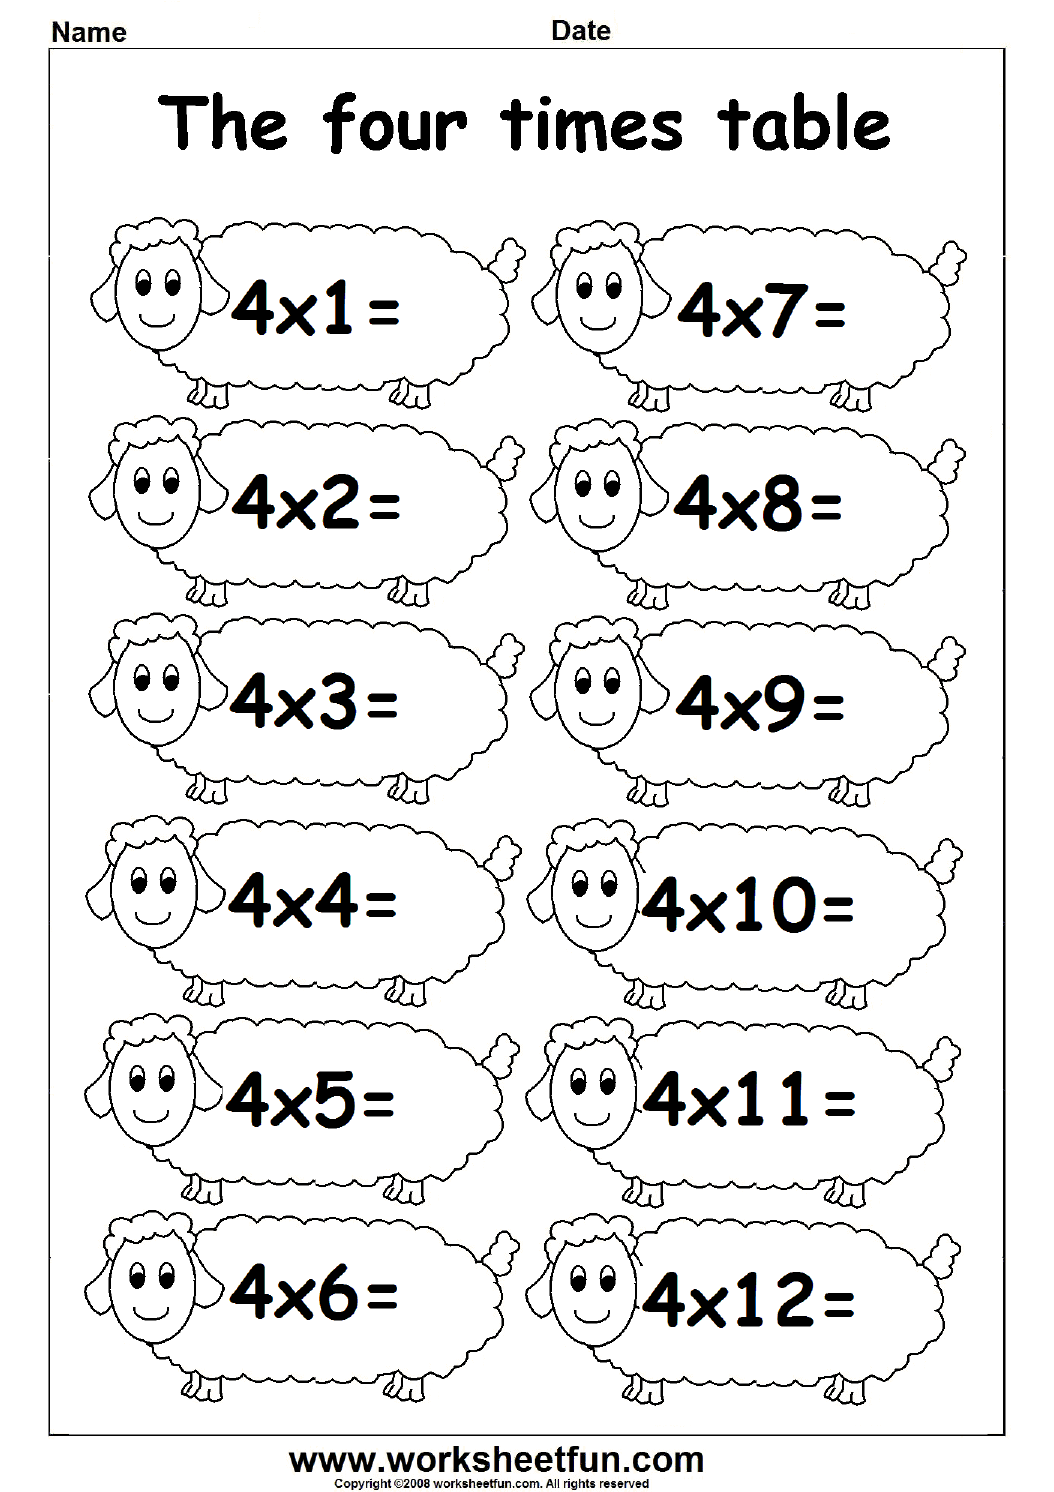  Multiplication Times Tables Worksheets 2 3 4 Times Tables Three Worksheets FREE 